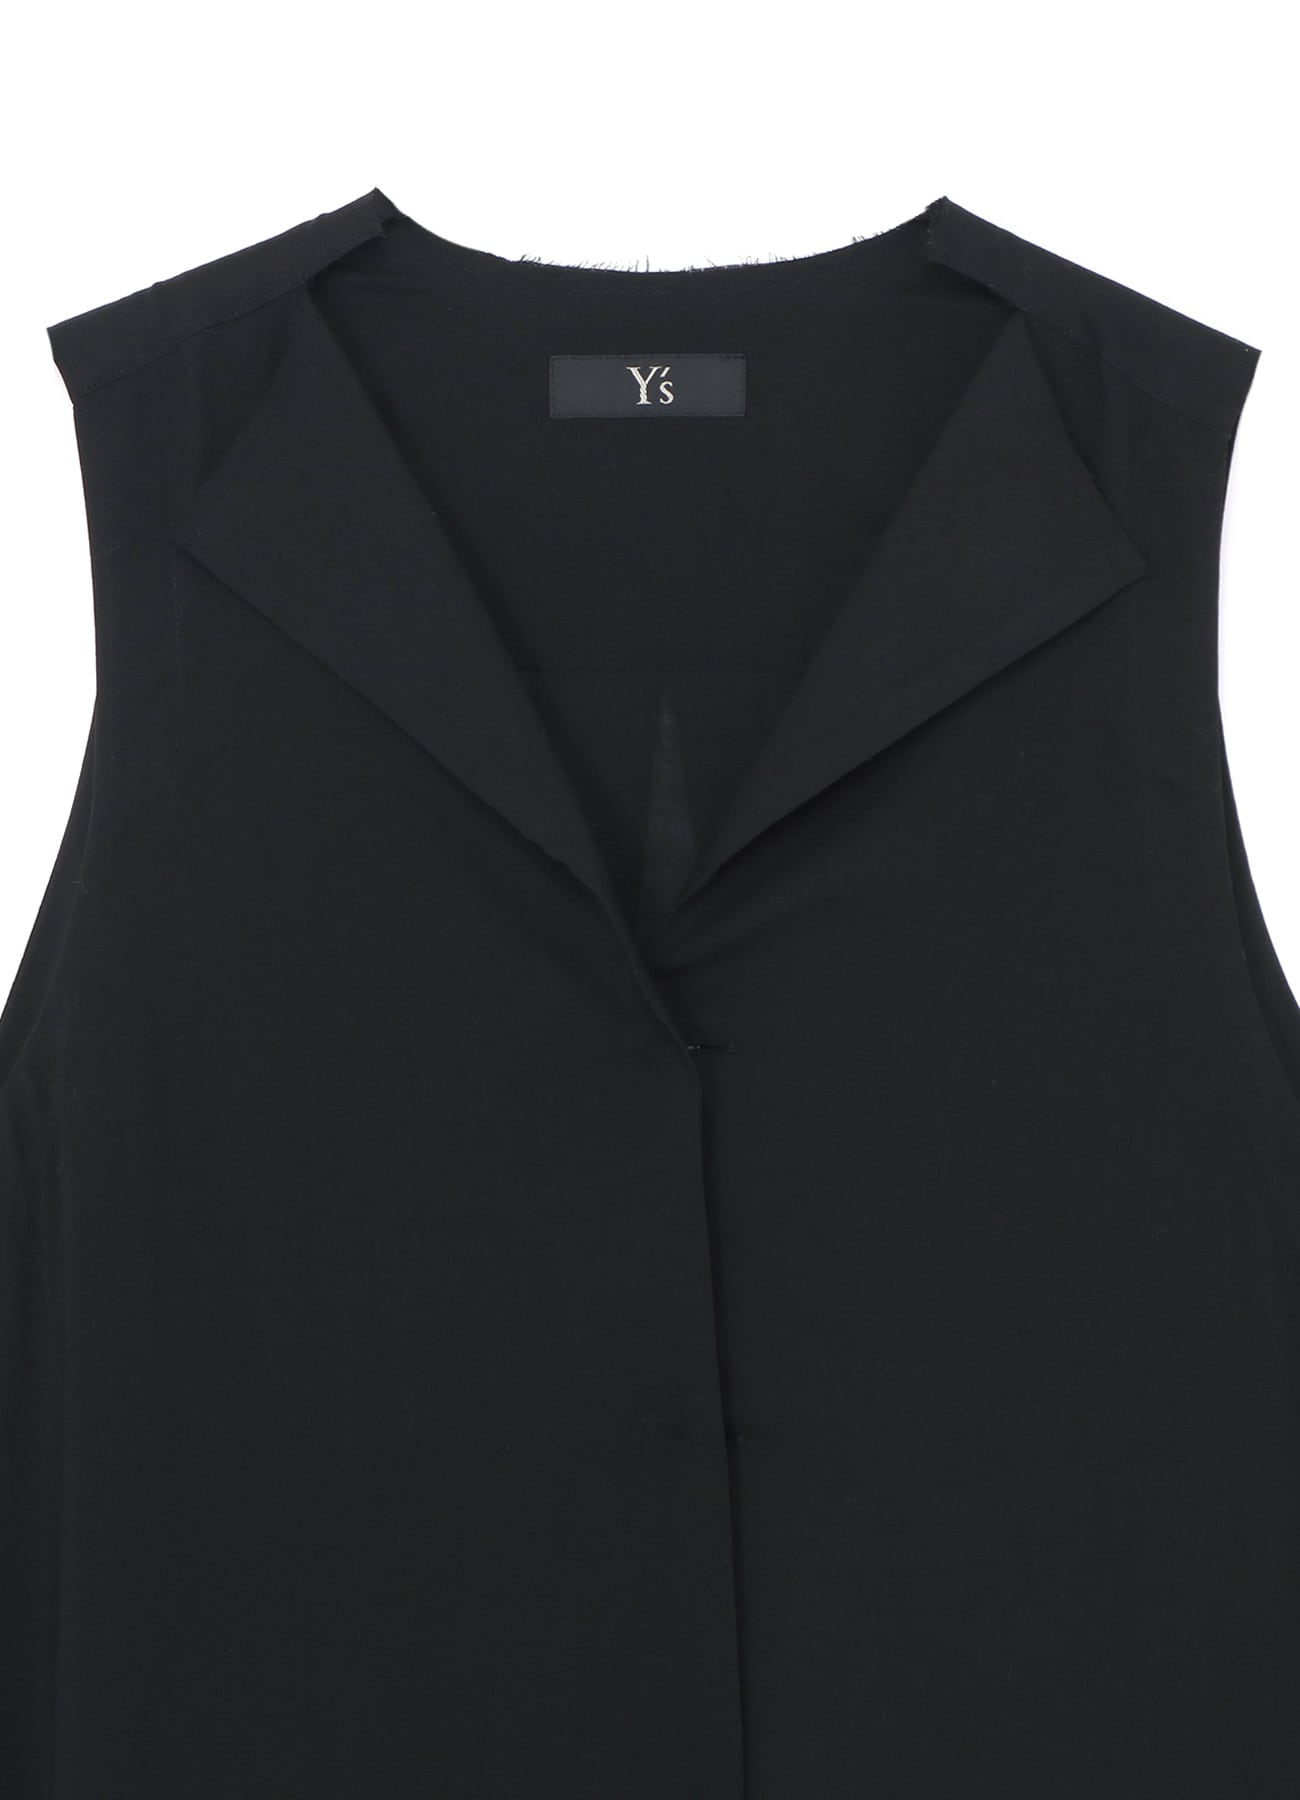 SLEEVELESS DRESS WITH NOTCHED LAPEL COLLAR(XS Black): Y's｜THE 